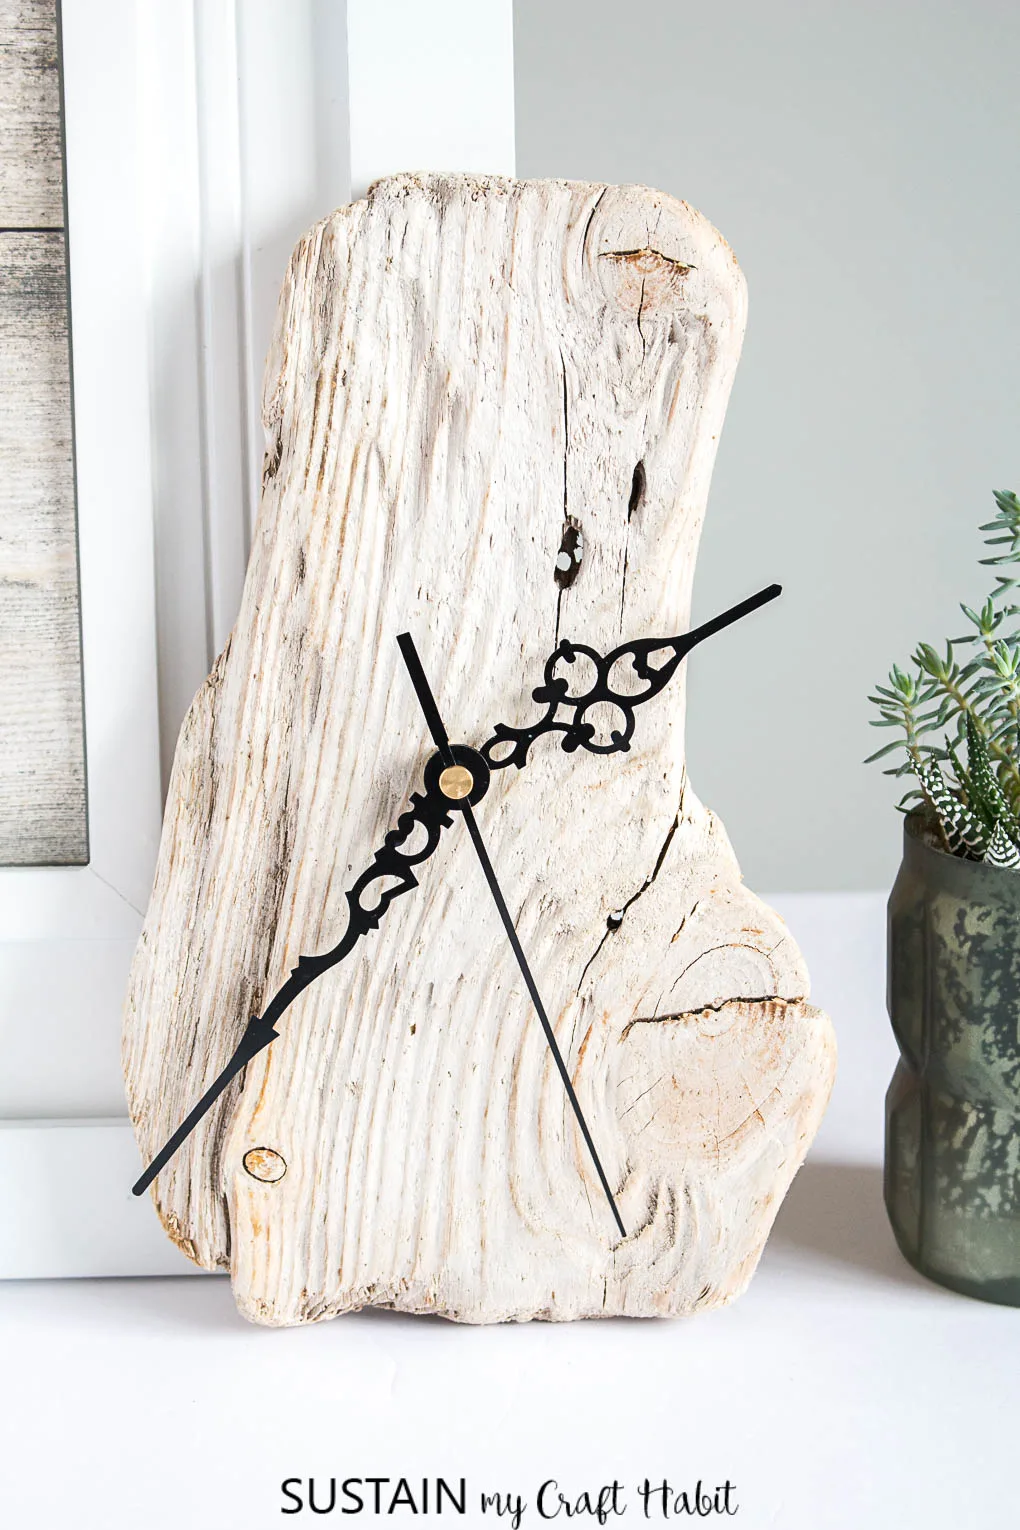 A lovely clock made with a piece of beach-found driftwood and an inexpensive clock kit.